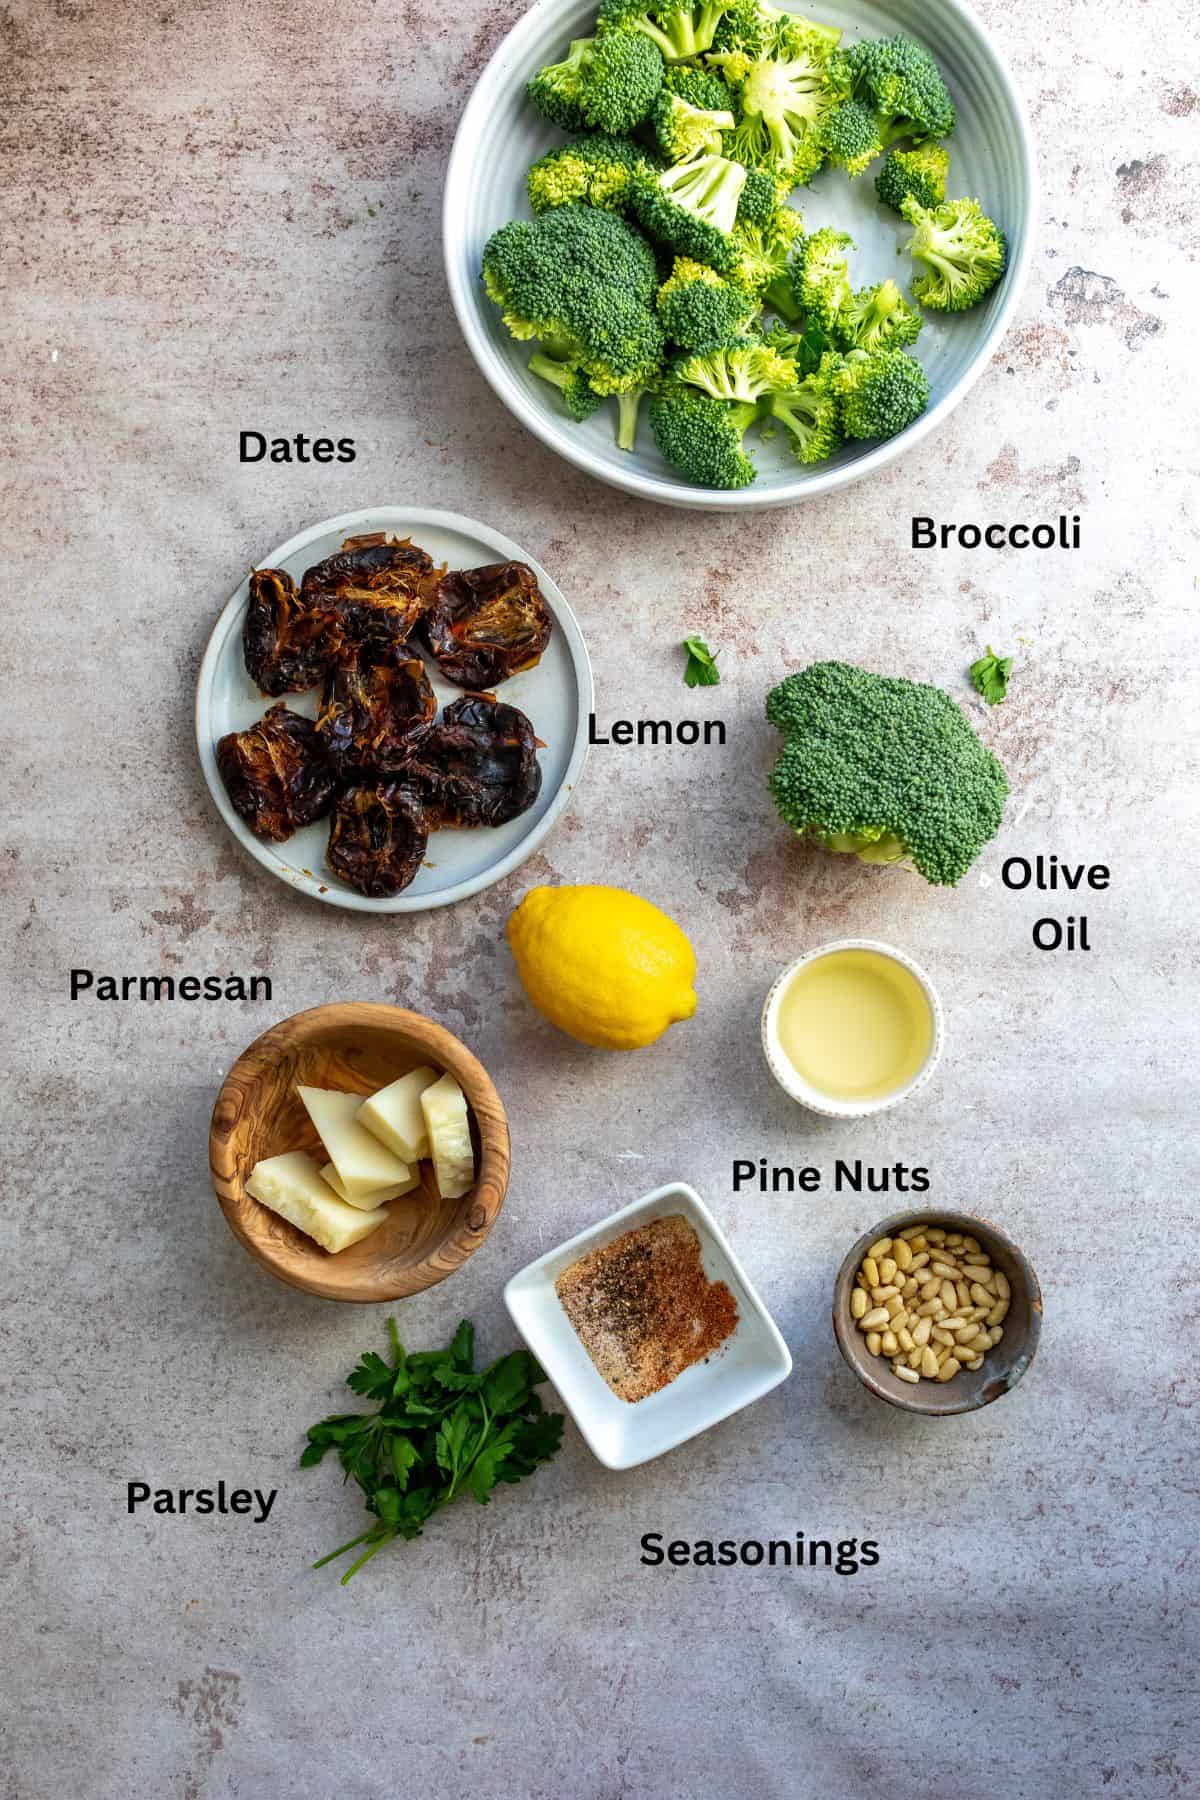 Seasonings, lemons and ingredients needed to make this meal in small bowls. 